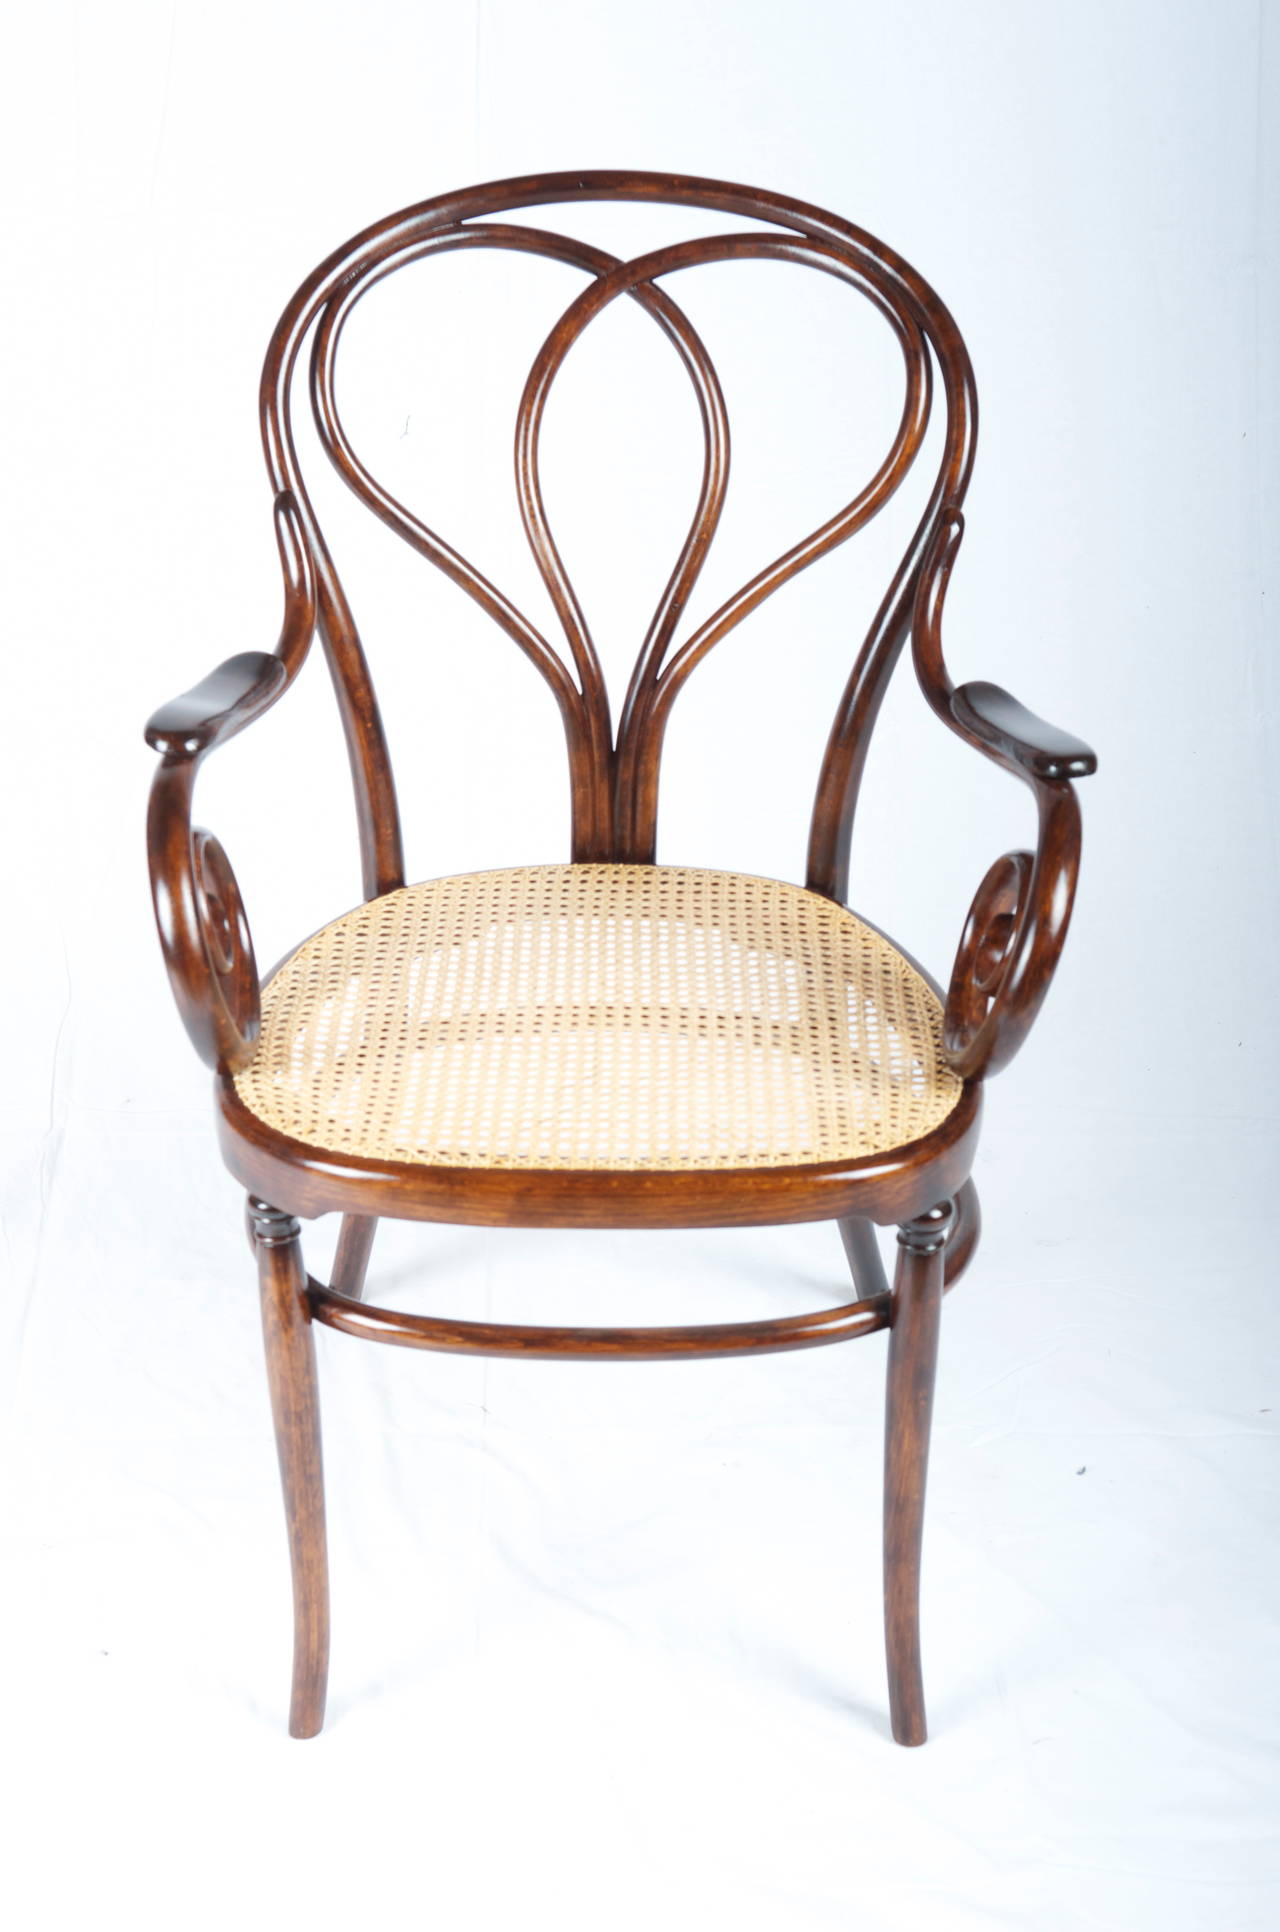 Very rare J. J. Kohn armchair no. 23
excellent restored with shellac finish and new cane.